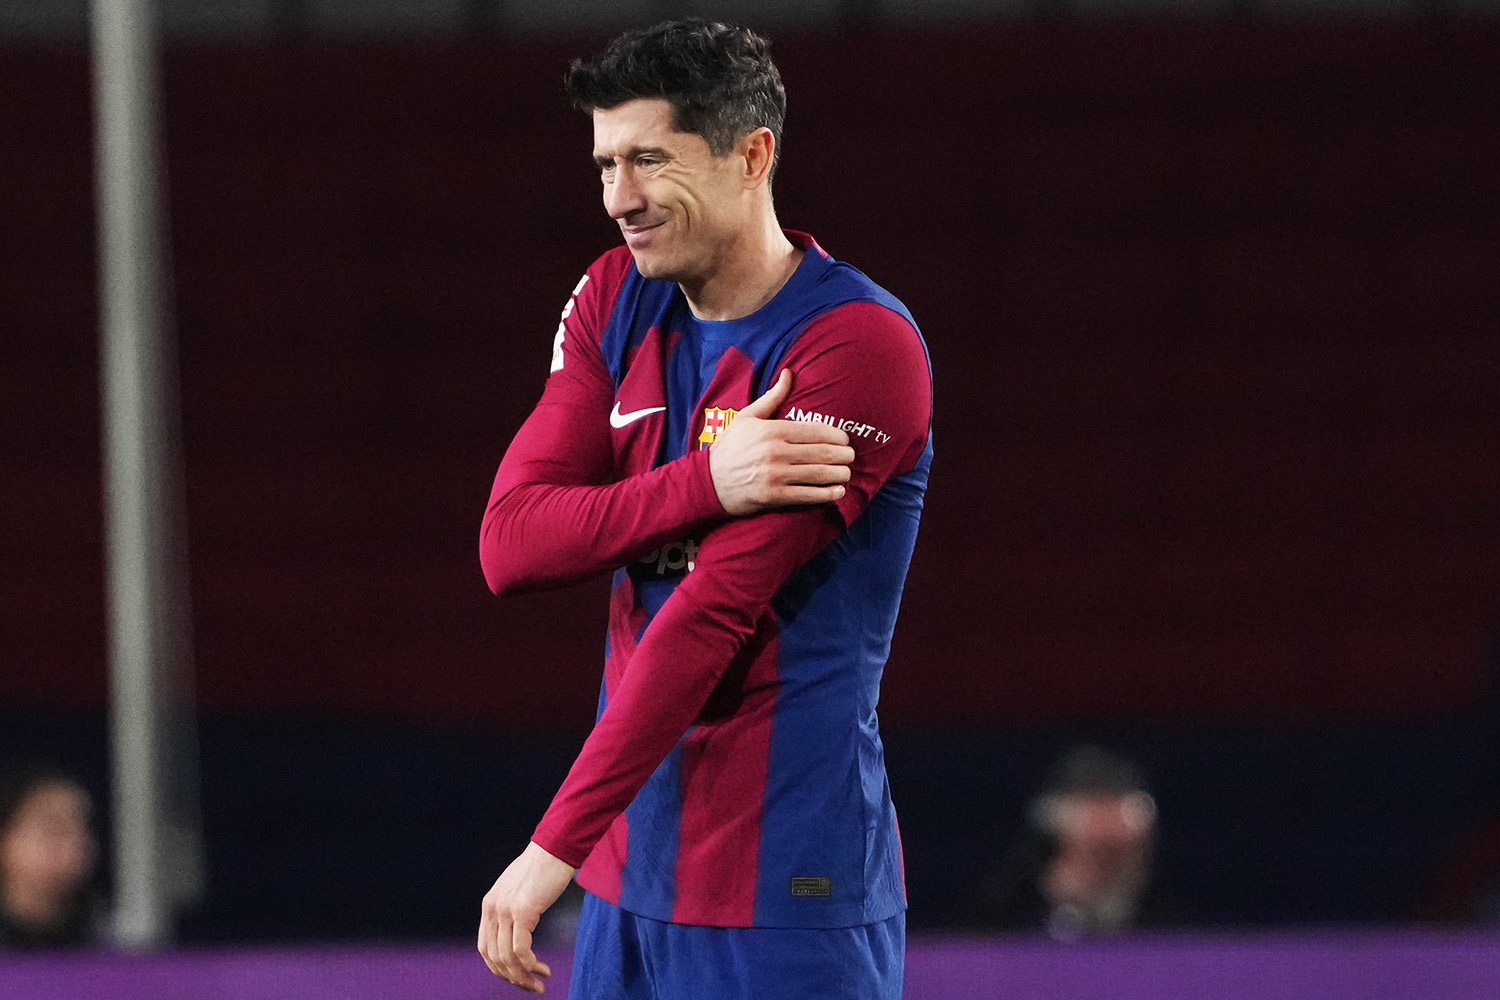 “This is my opinion.”  Will this new coach keep Robert Lewandowski in Barcelona?!